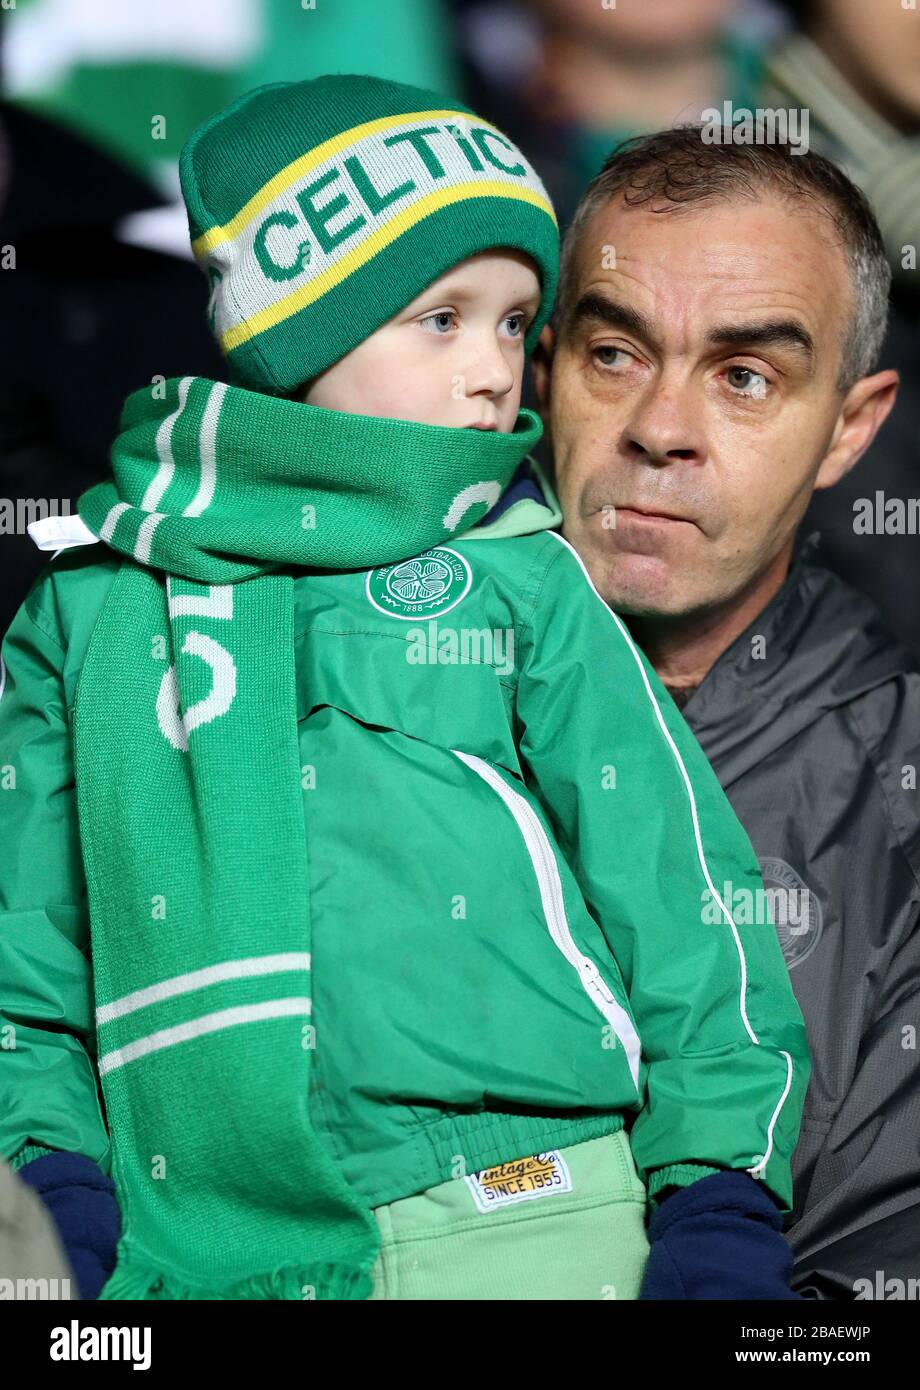 A young Celtic fan in the stands Stock Photo